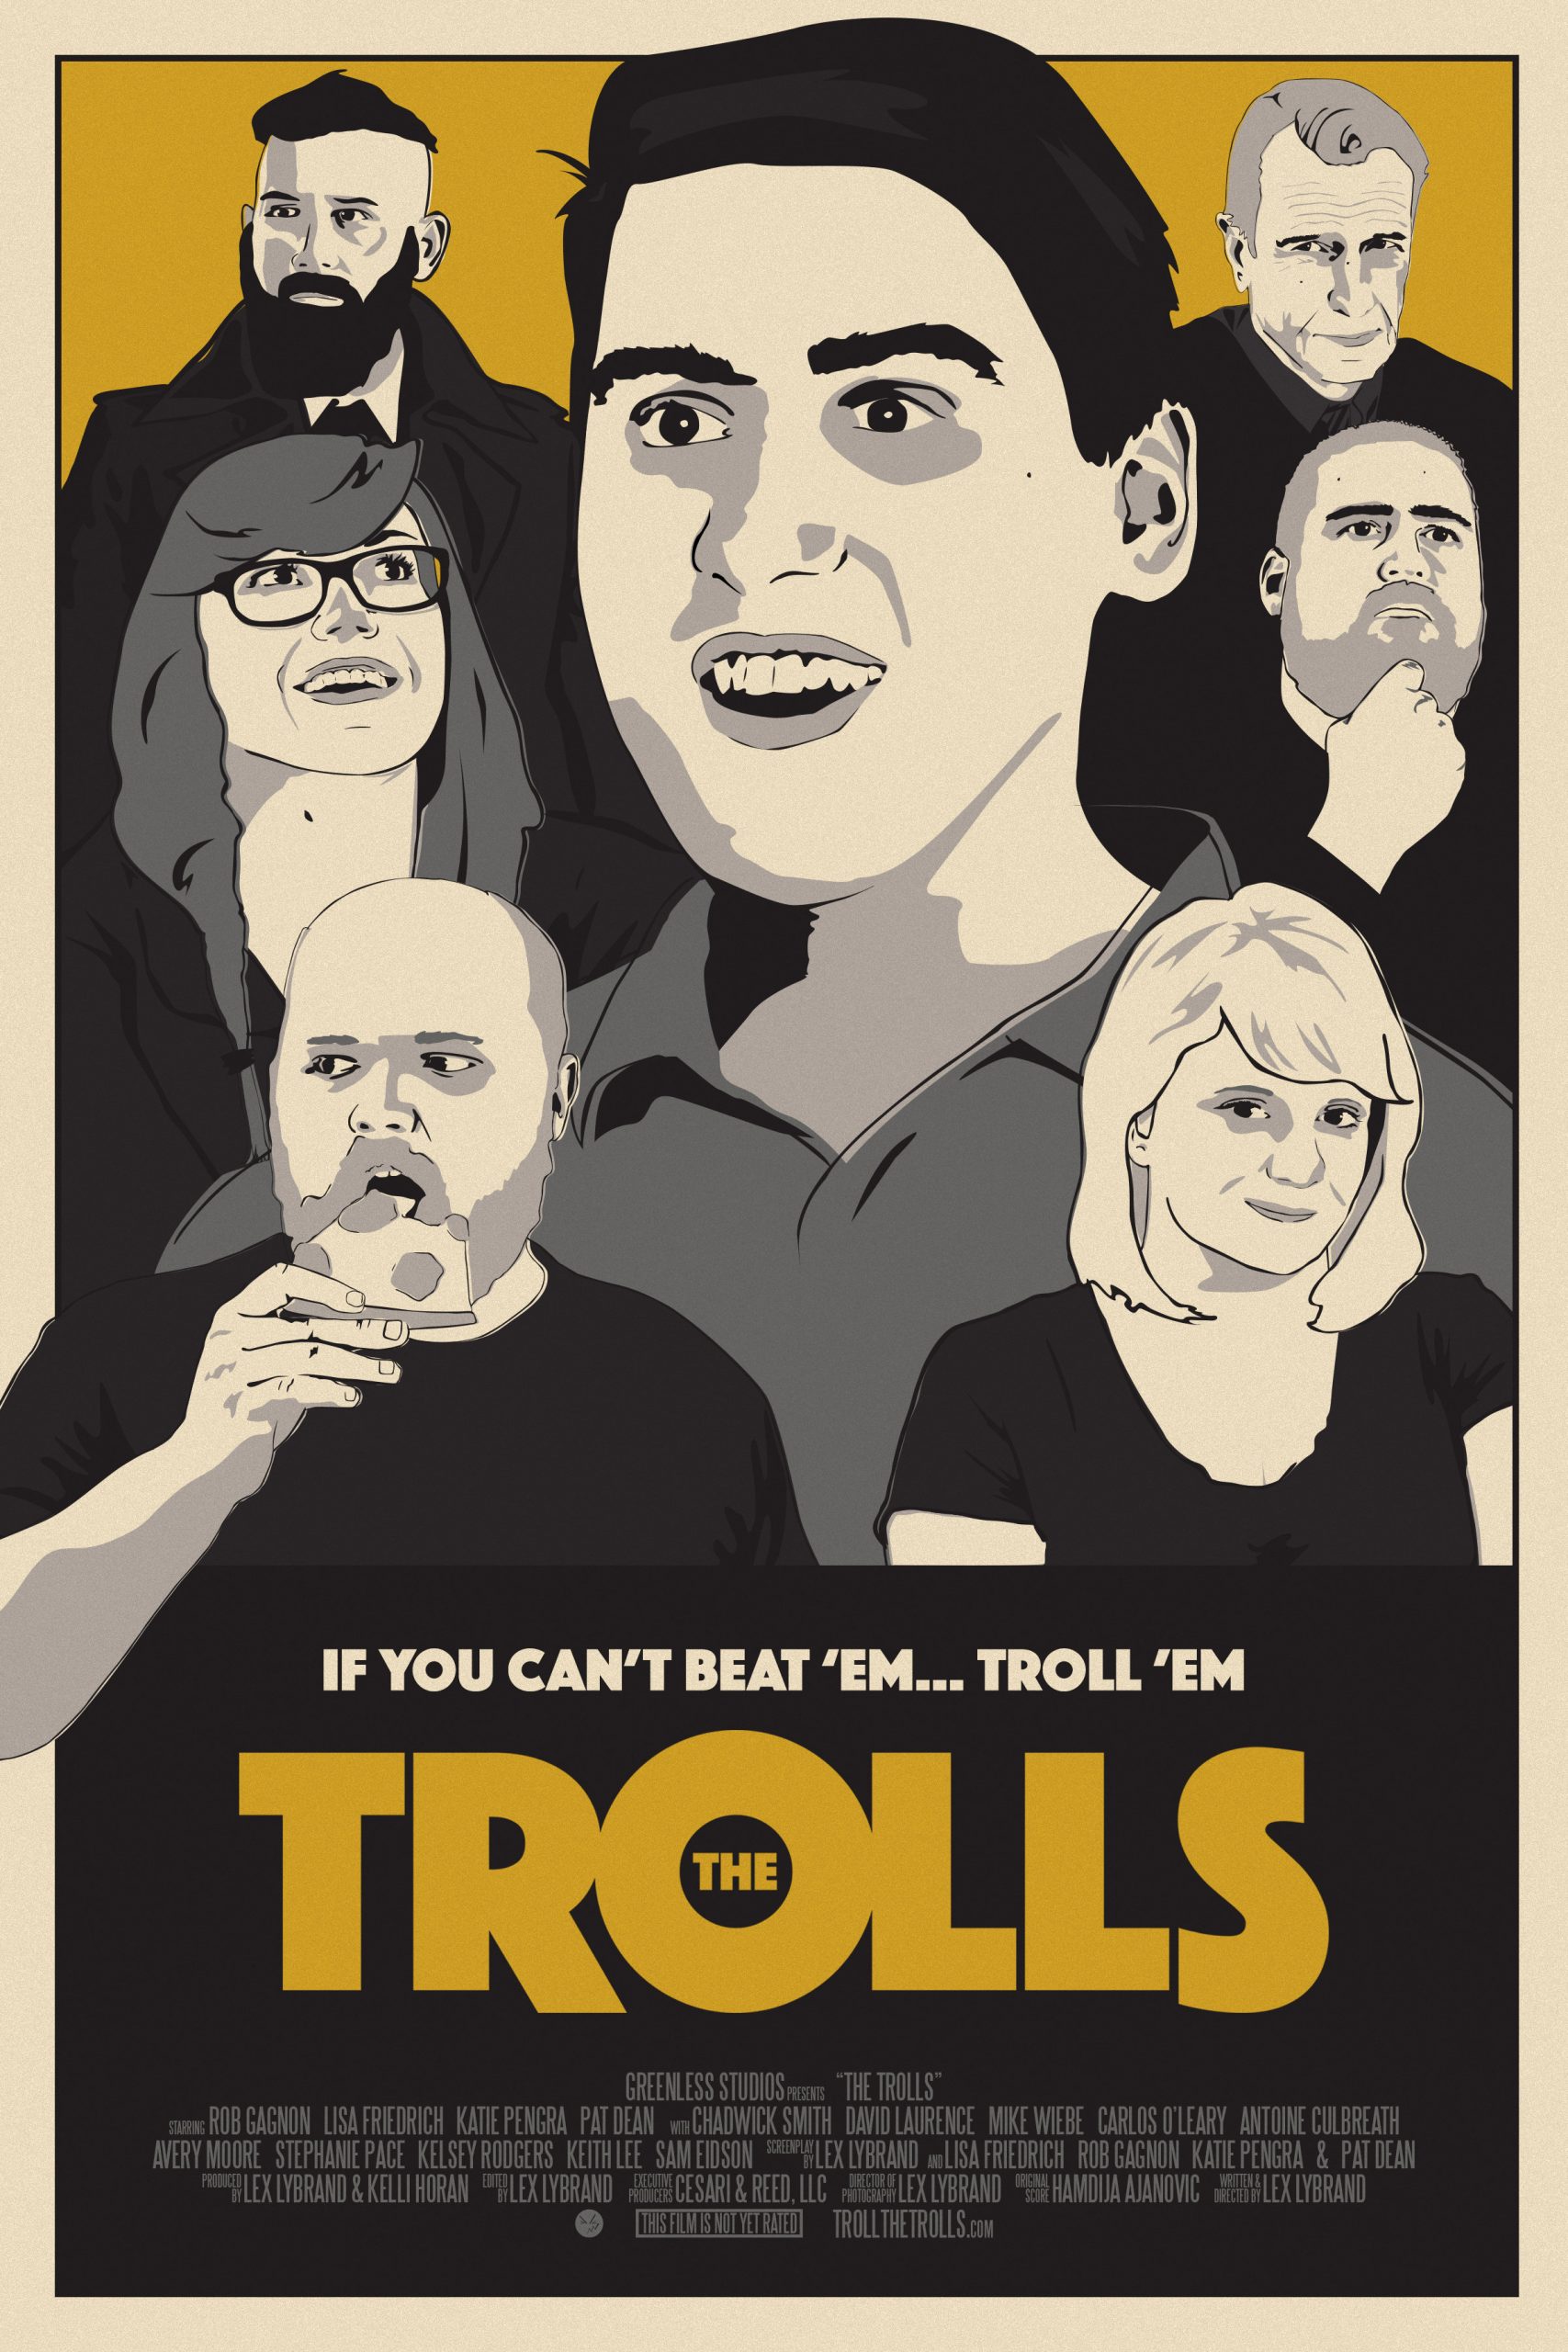 Attend a screening of The Trolls with EFF-Austin